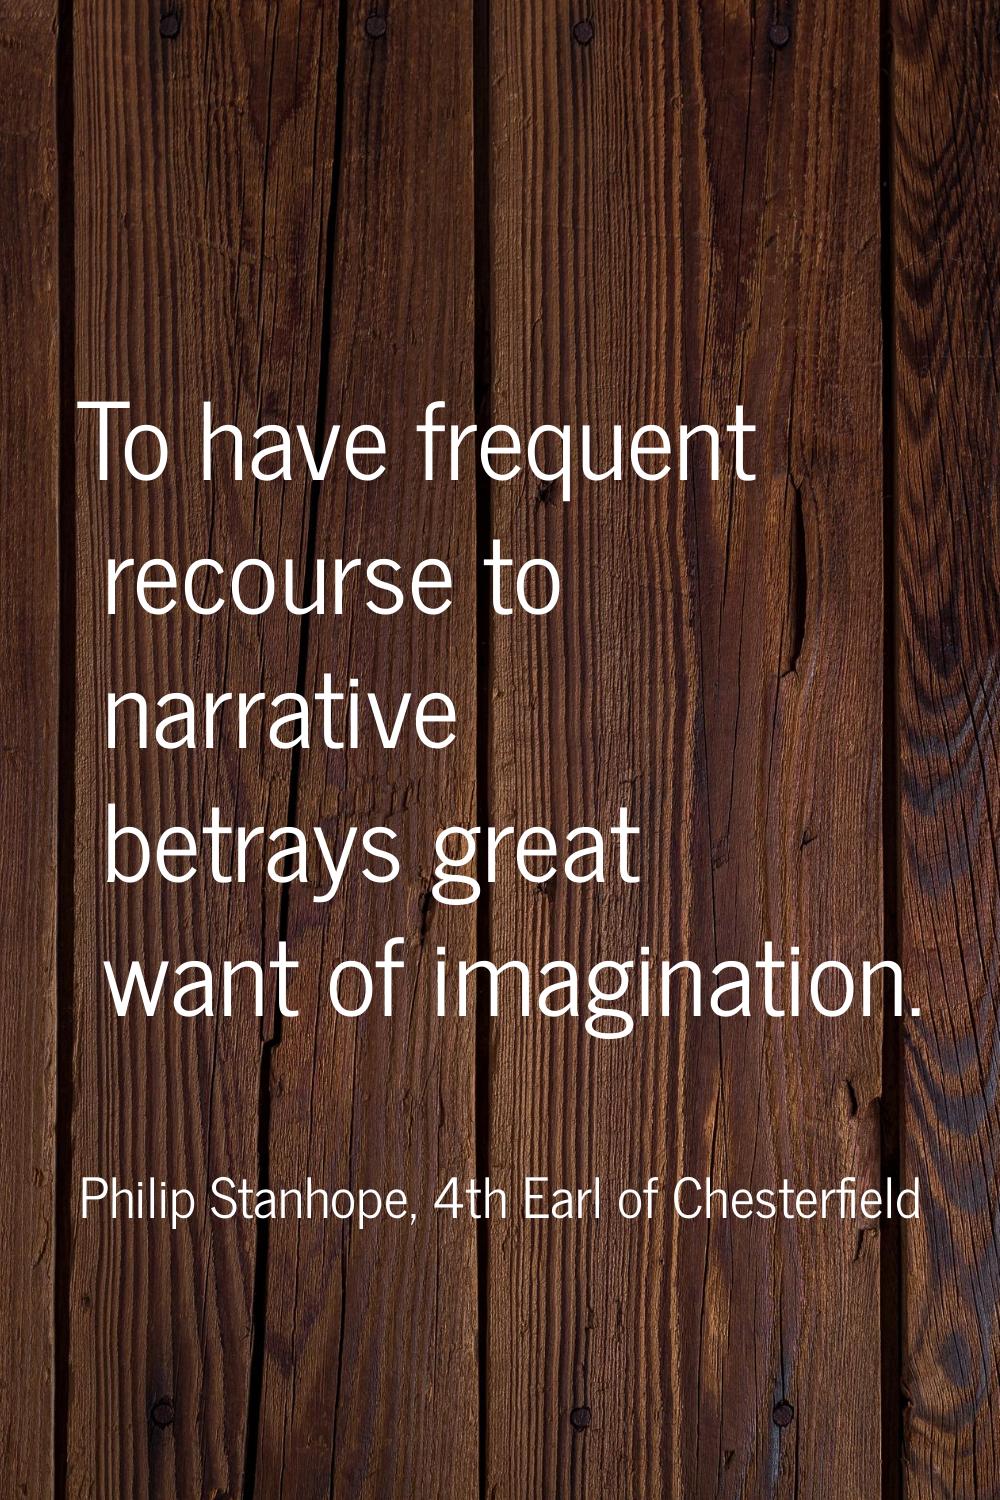 To have frequent recourse to narrative betrays great want of imagination.